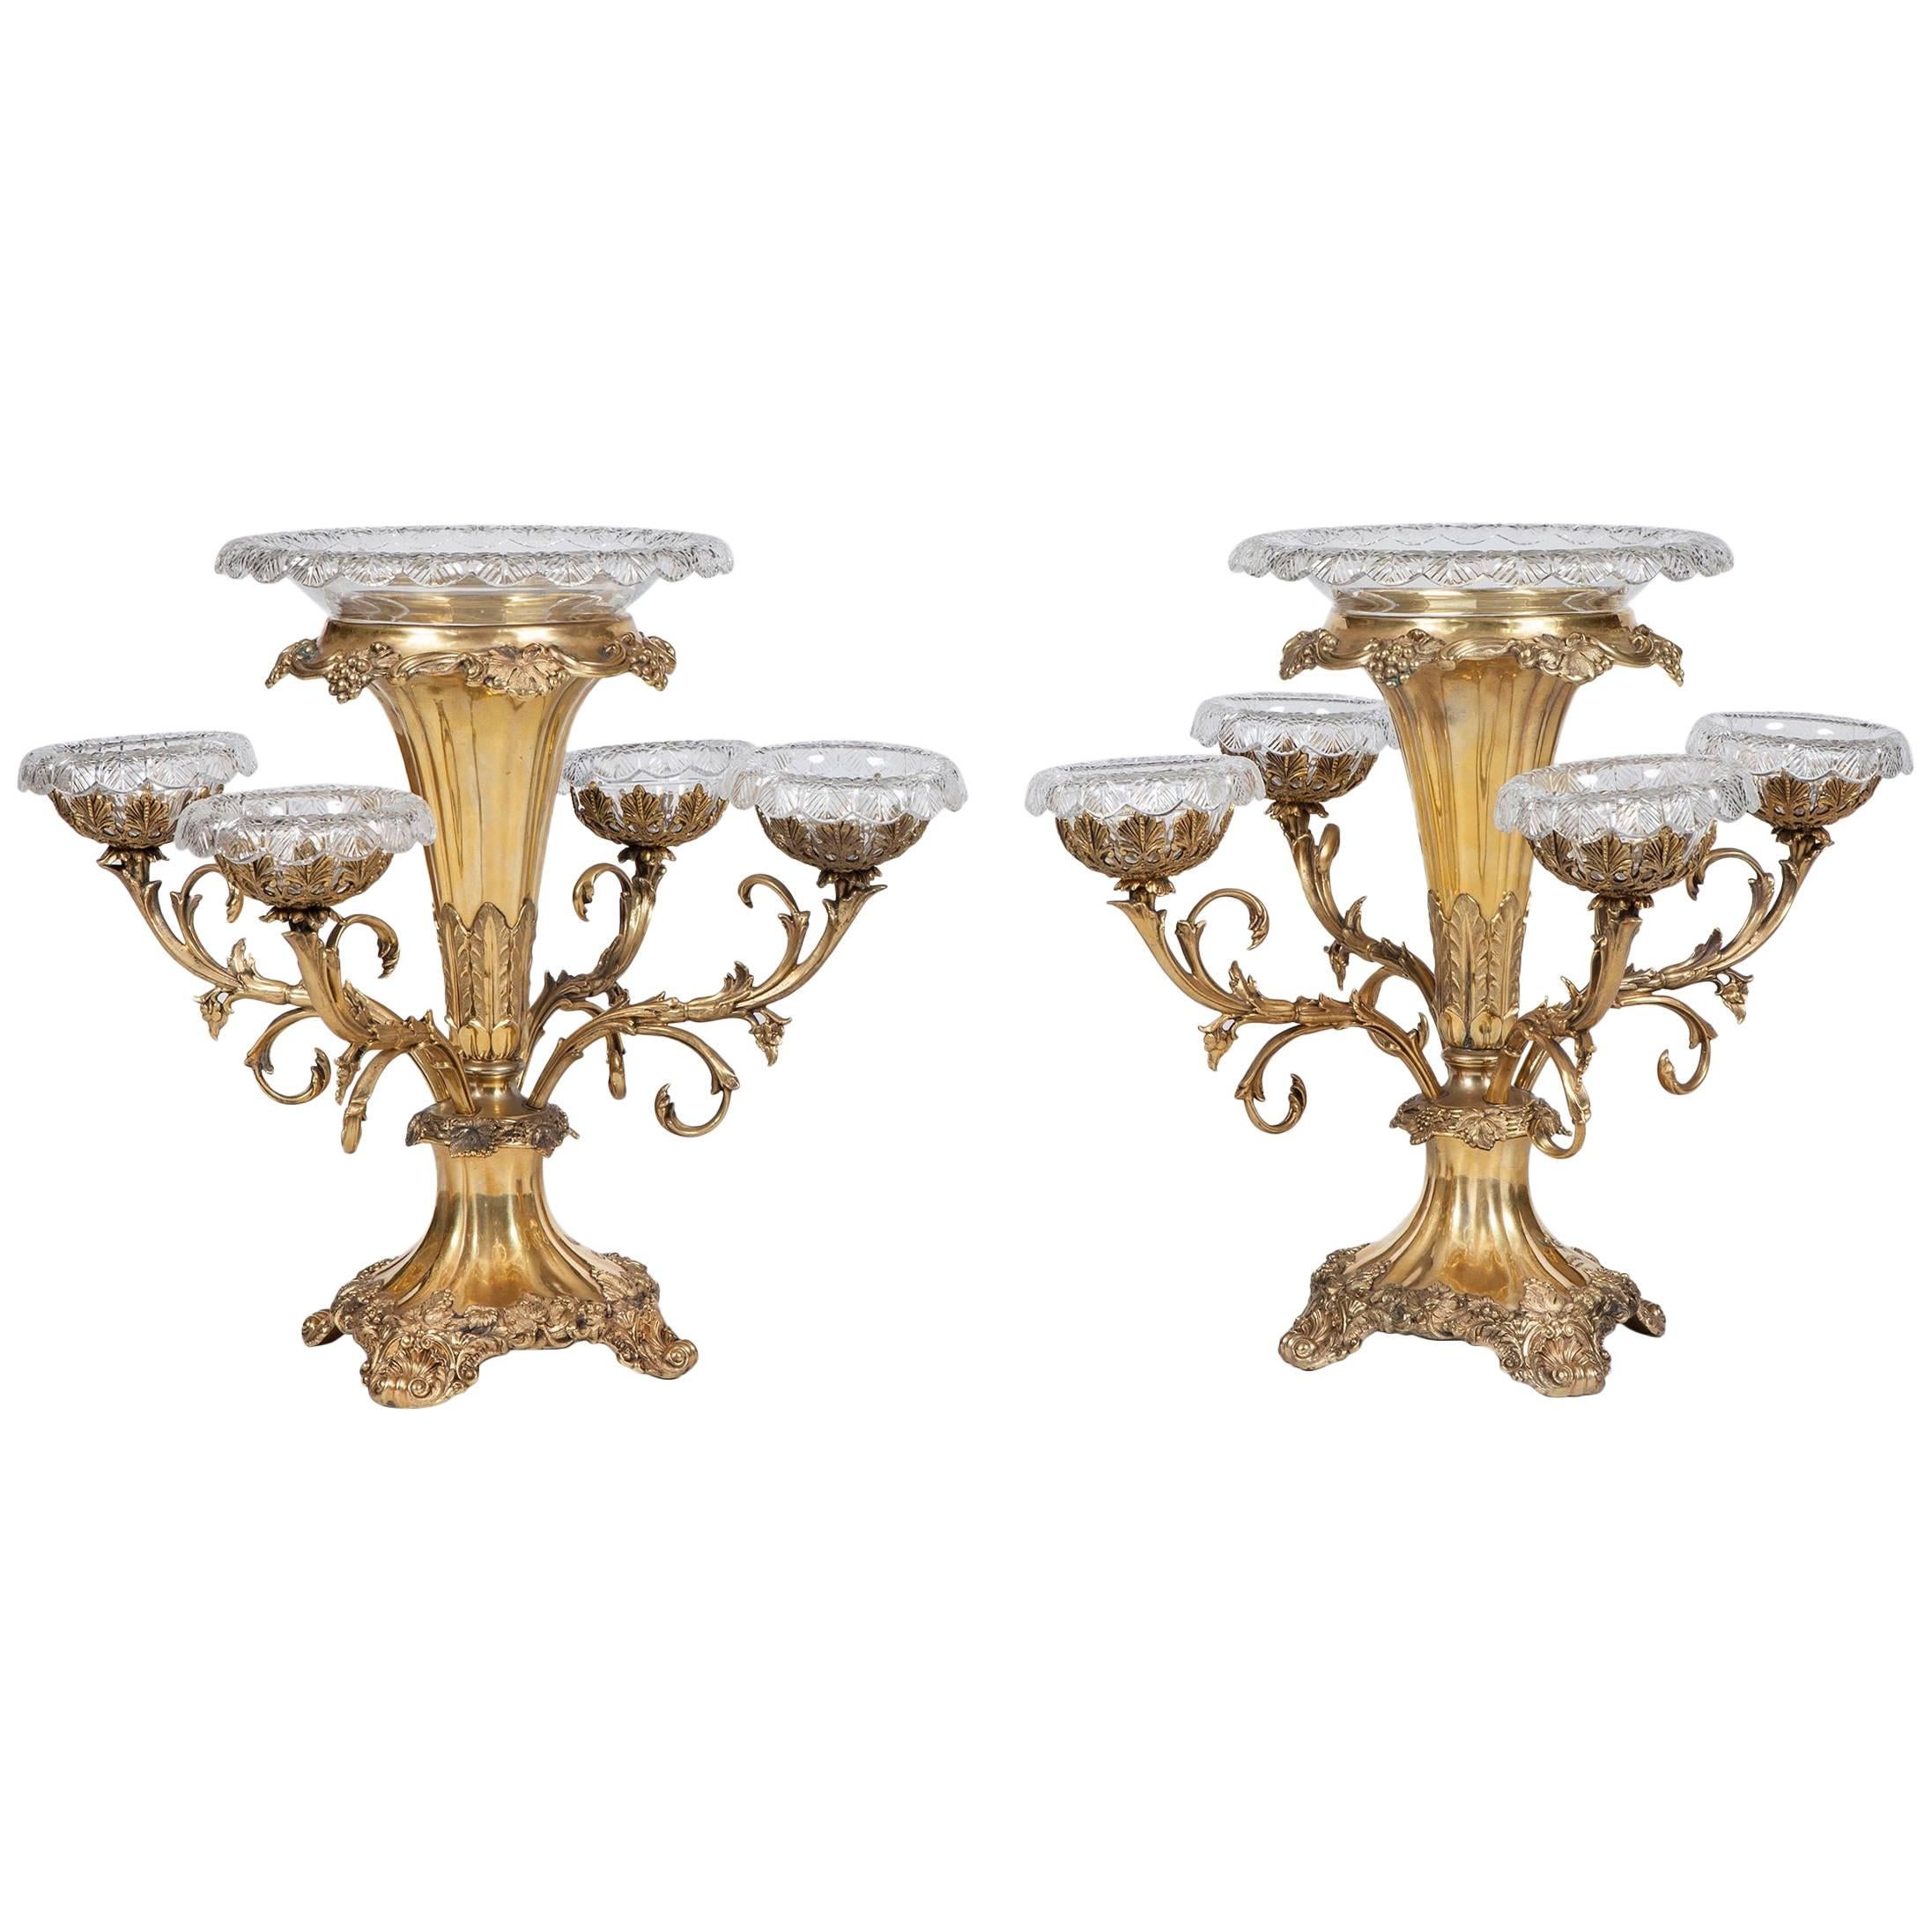 Pair of 19th Century Silver Gilt Plated Epergnes